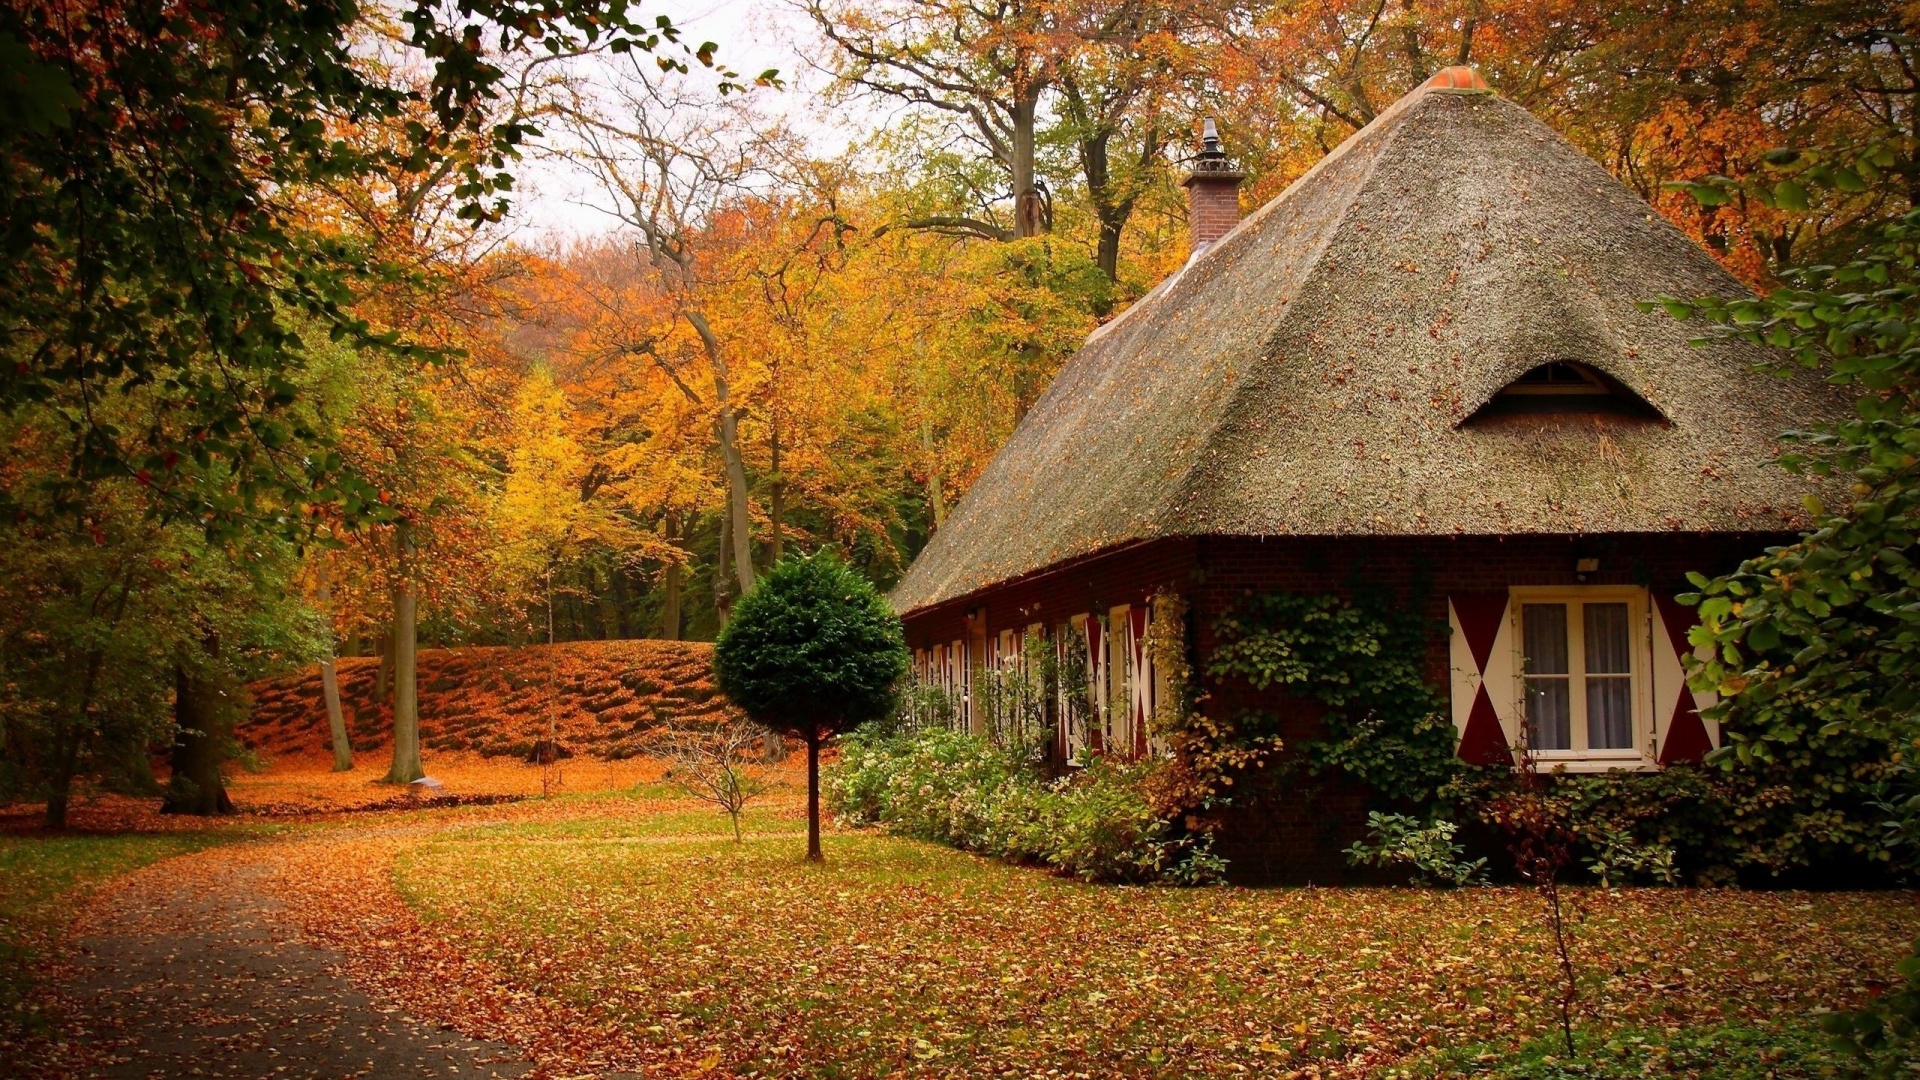 1920x1080 Country House in Autumn desktop PC and Mac wallpaper 1920x1080